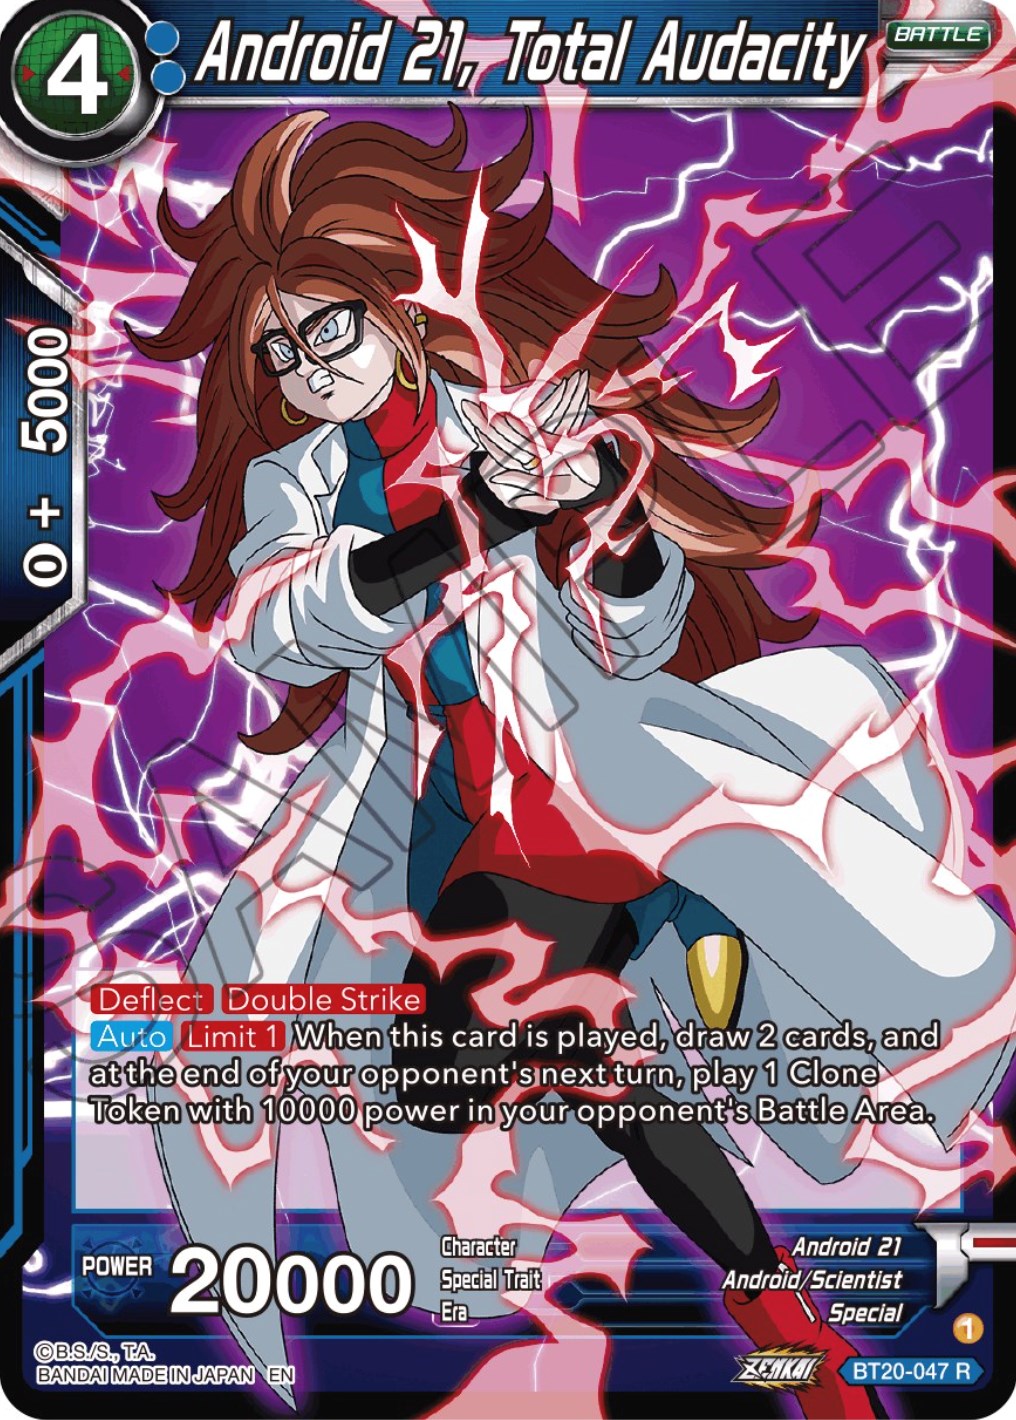 Android 21, Total Audacity (BT20-047) [Power Absorbed] | North Valley Games